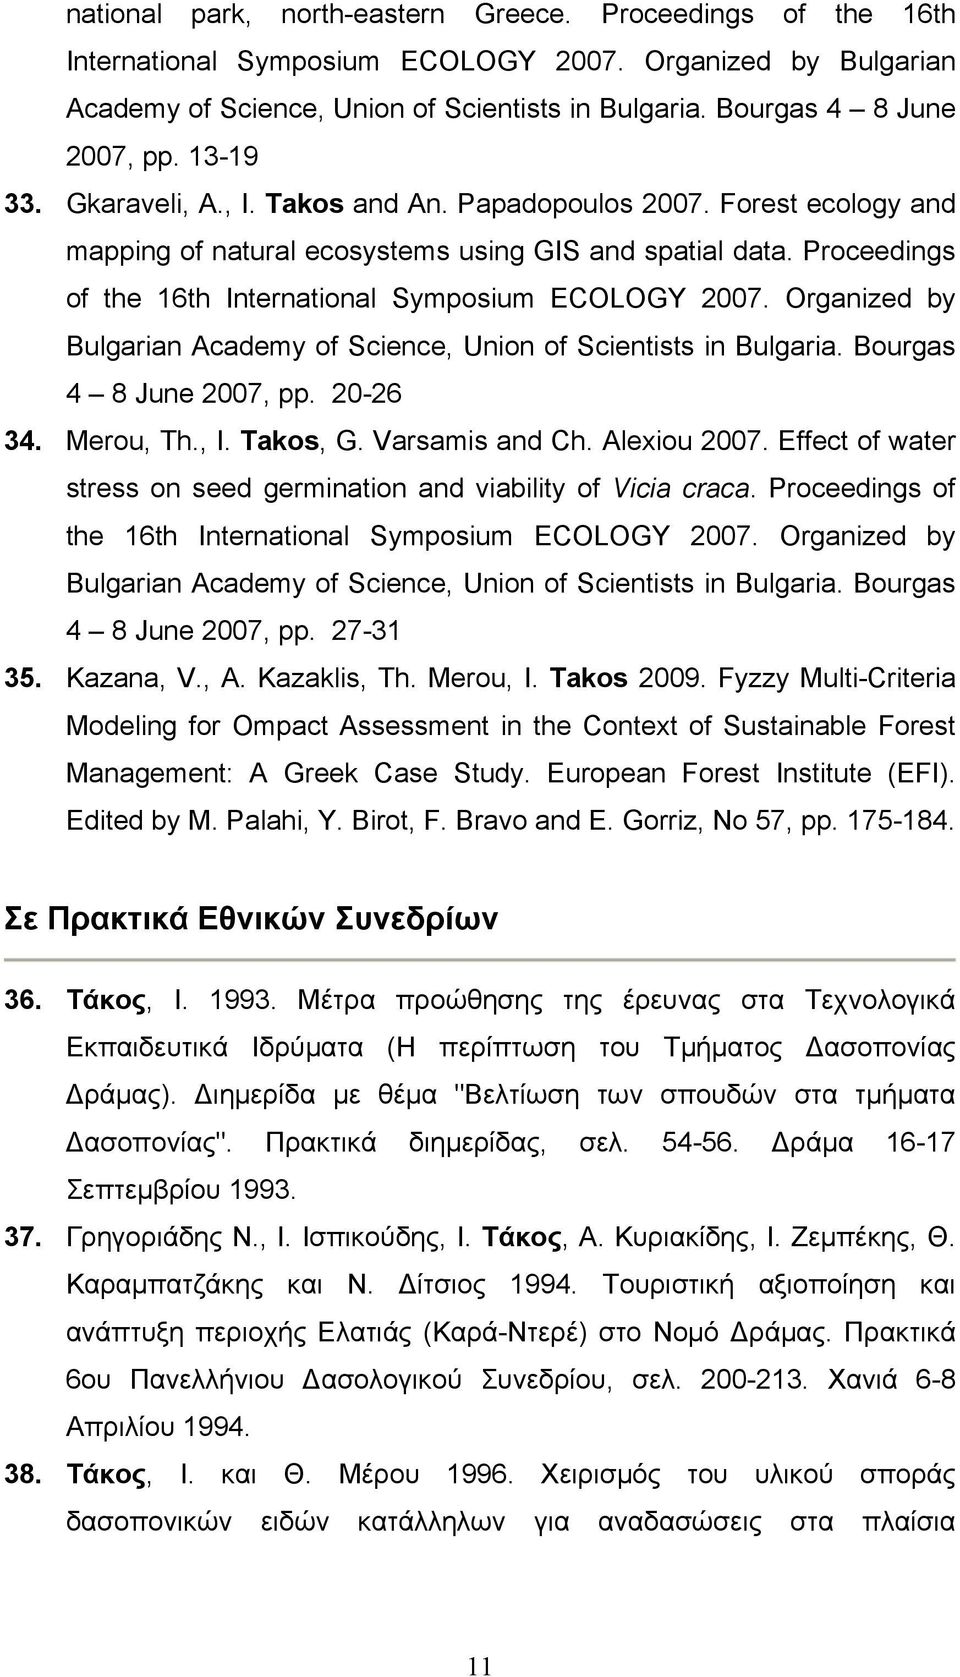 Proceedings of the 16th International Symposium ECOLOGY 2007. Organized by Bulgarian Academy of Science, Union of Scientists in Bulgaria. Bourgas 4 8 June 2007, pp. 20-26 34. Merou, Th., I. Takos, G.